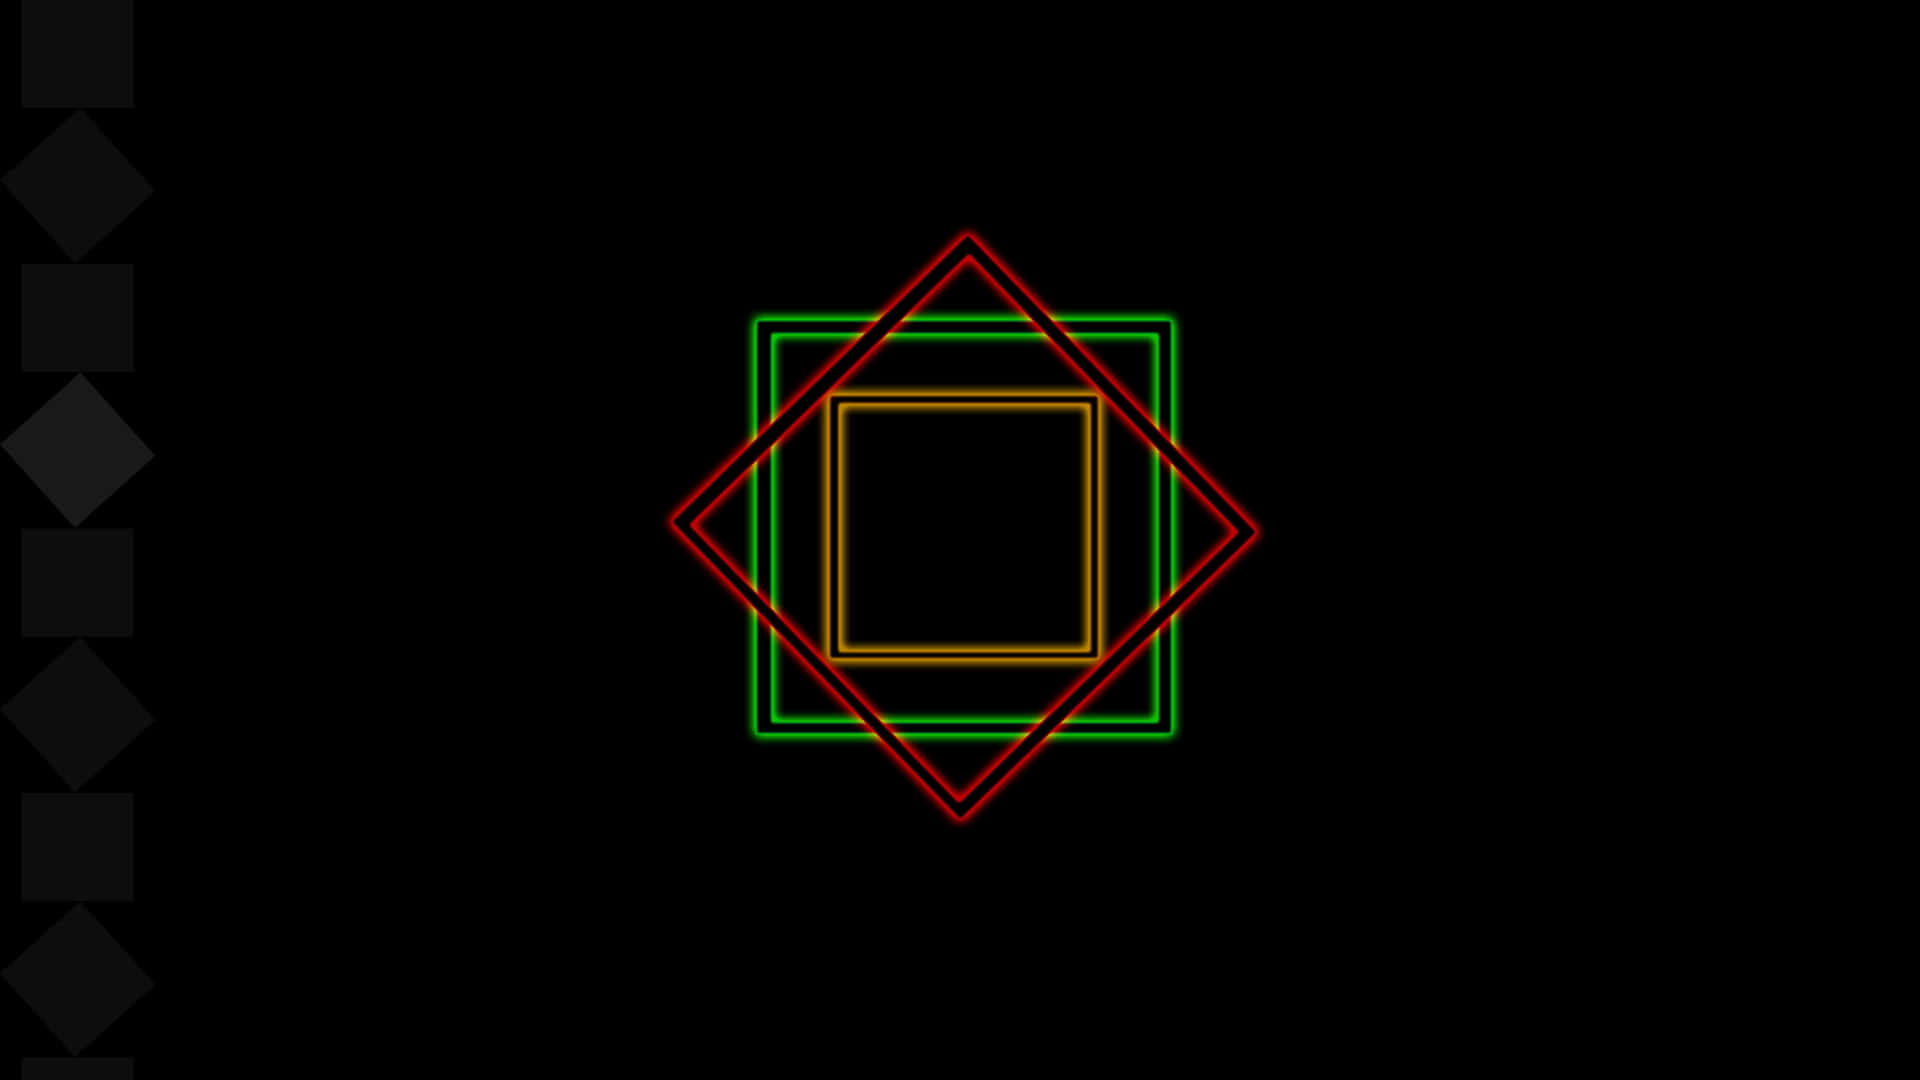 A Black Background With A Green And Red Square Wallpaper